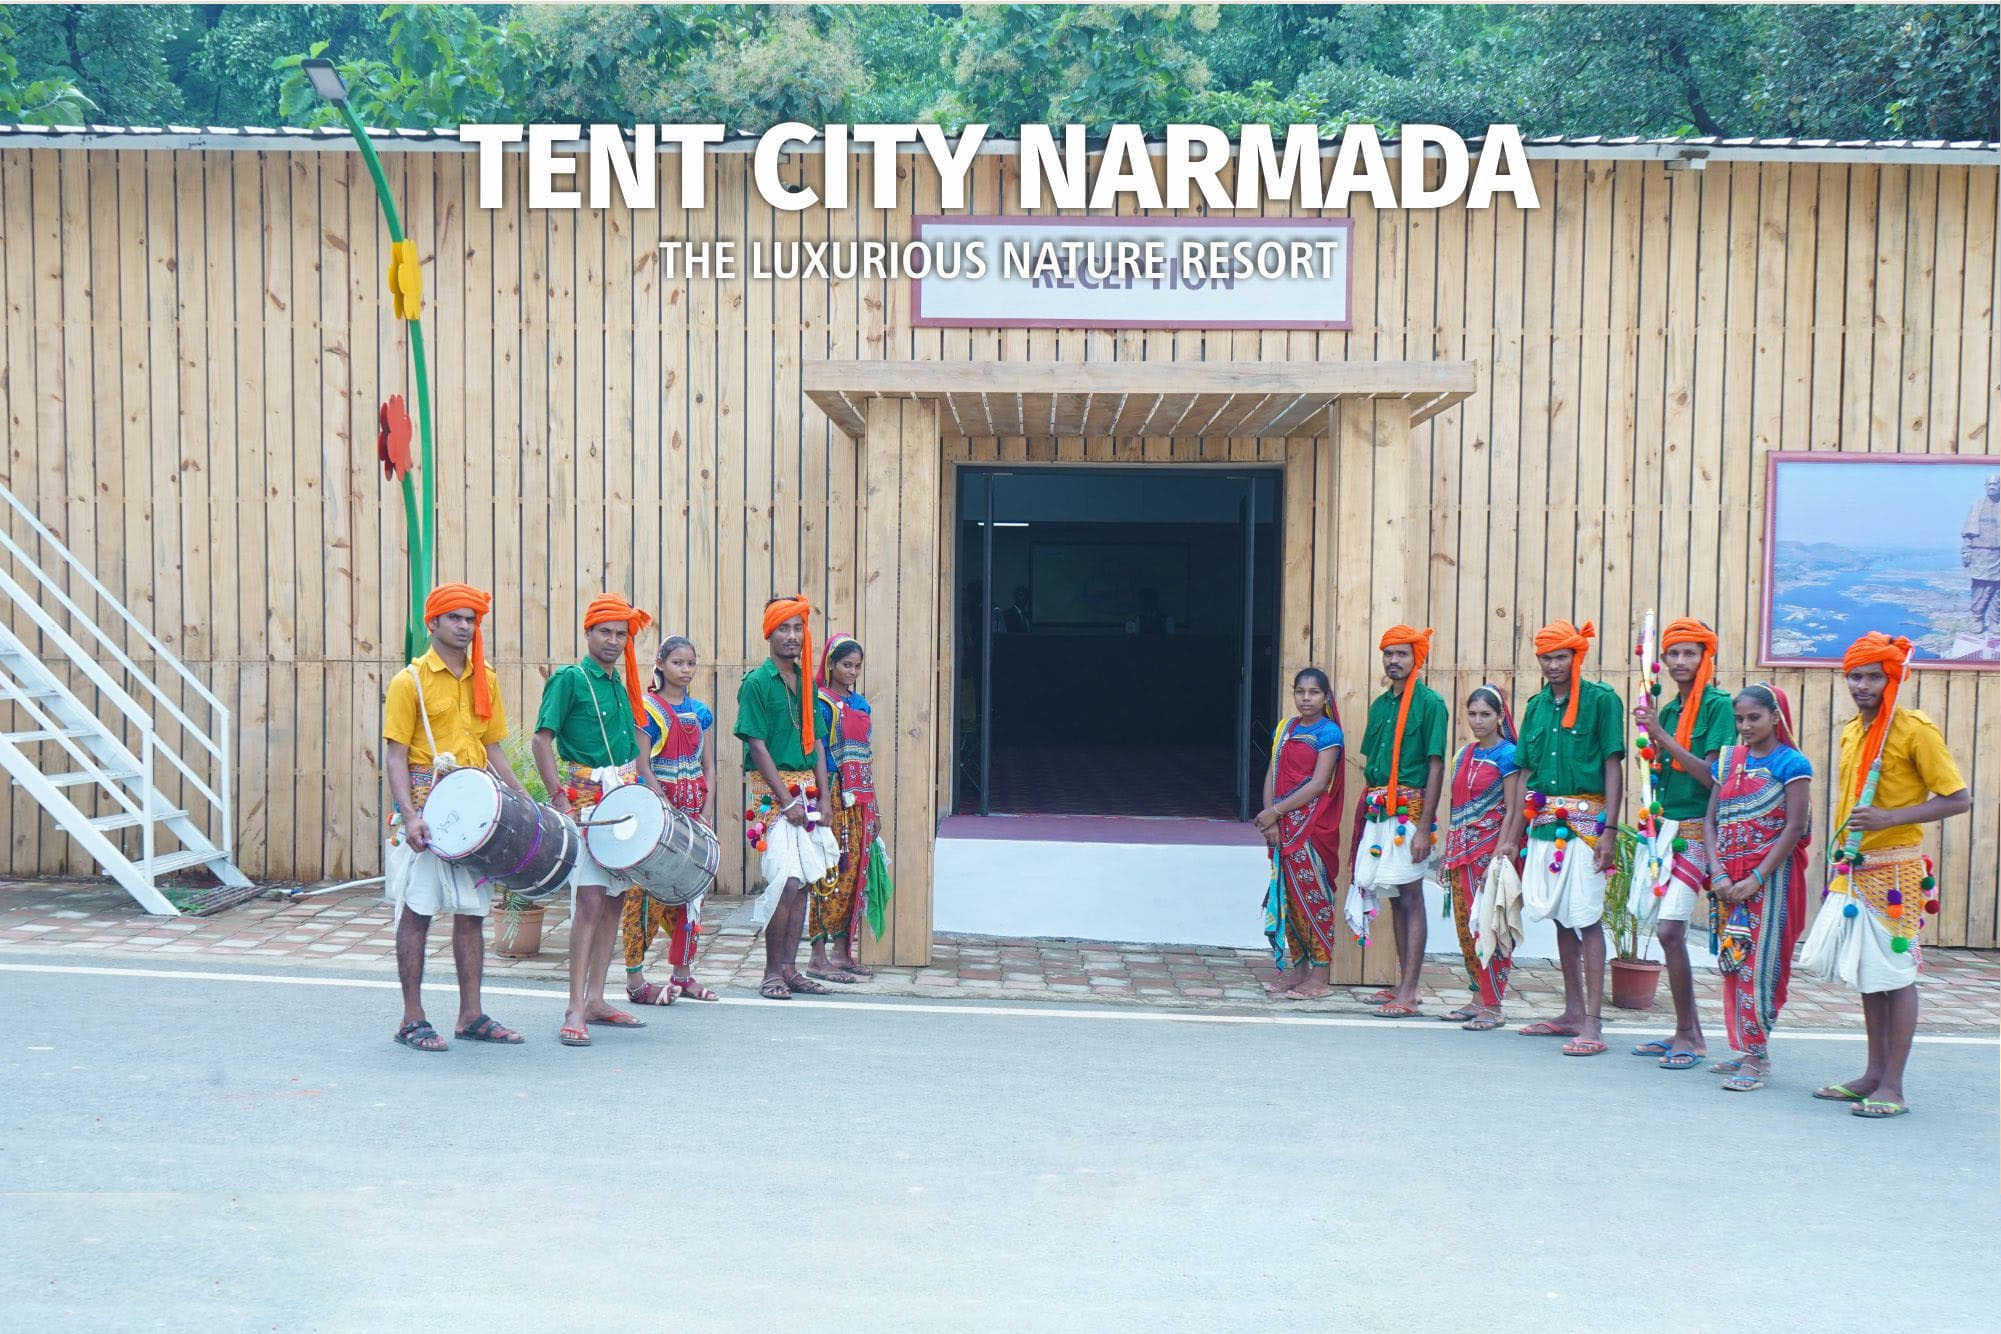 <span  class="uc_style_uc_tiles_grid_image_elementor_uc_items_attribute_title" style="color:#ffffff;">Tent City Narmada Gallery</span>